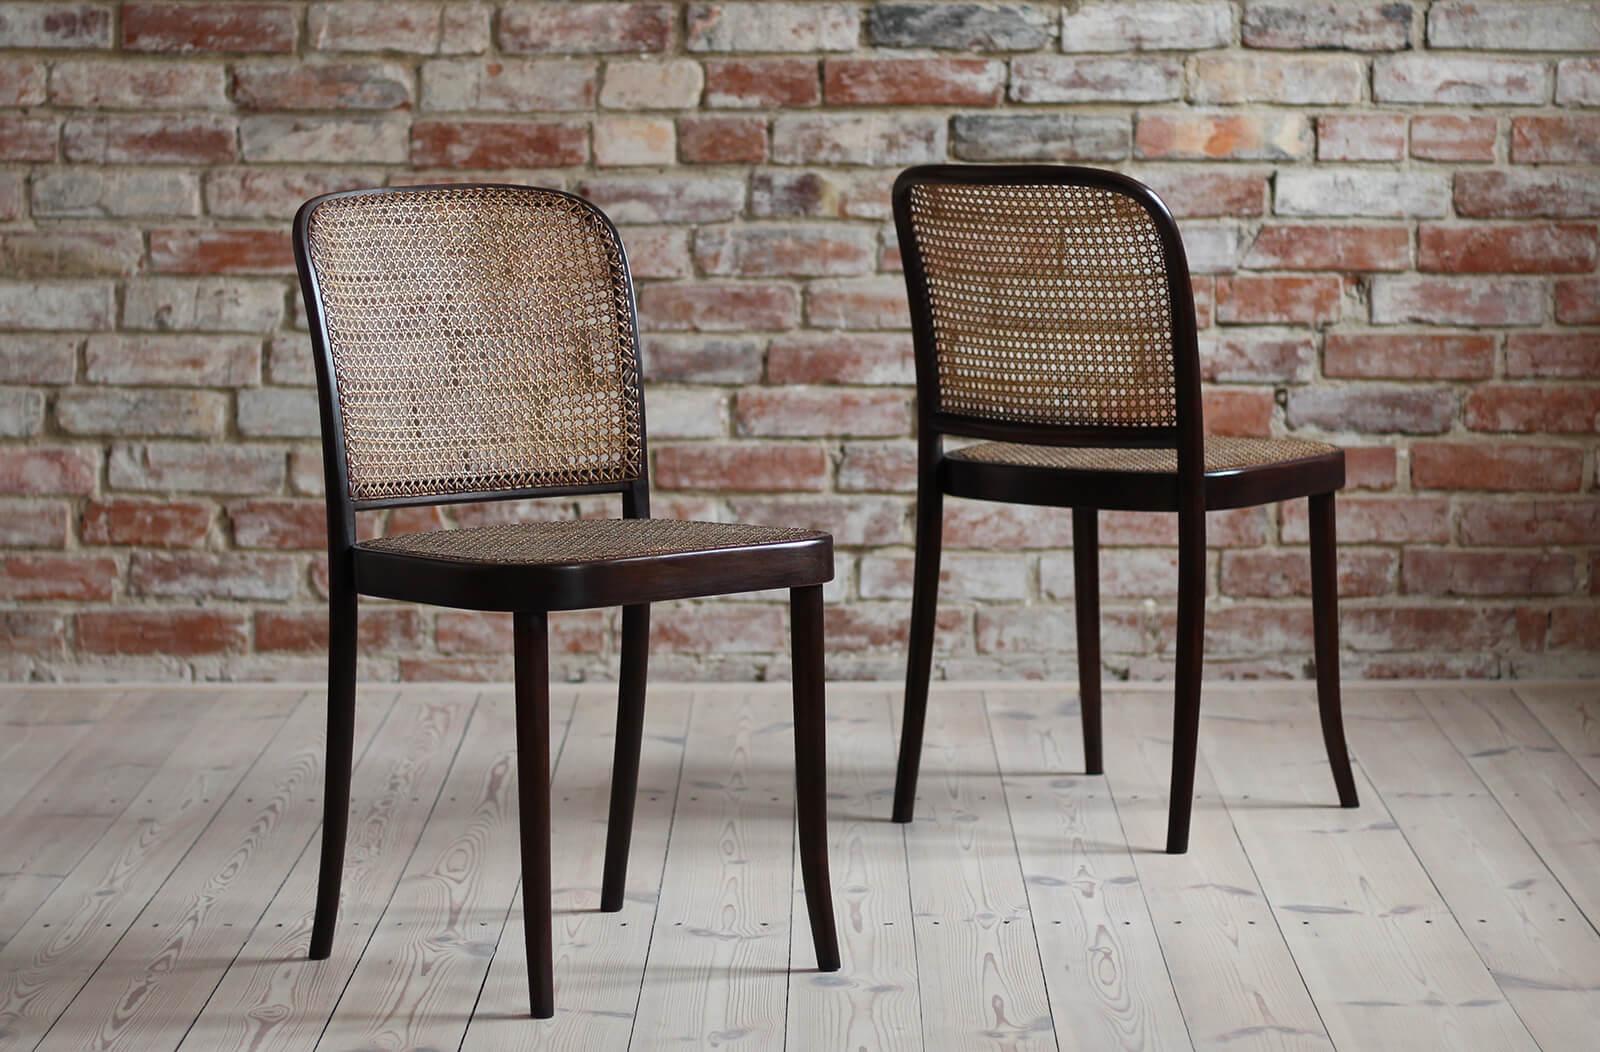 Cane Set of 4 Thonet Dining Chairs designed by J. Hoffmann, Model No. 811, 1940s